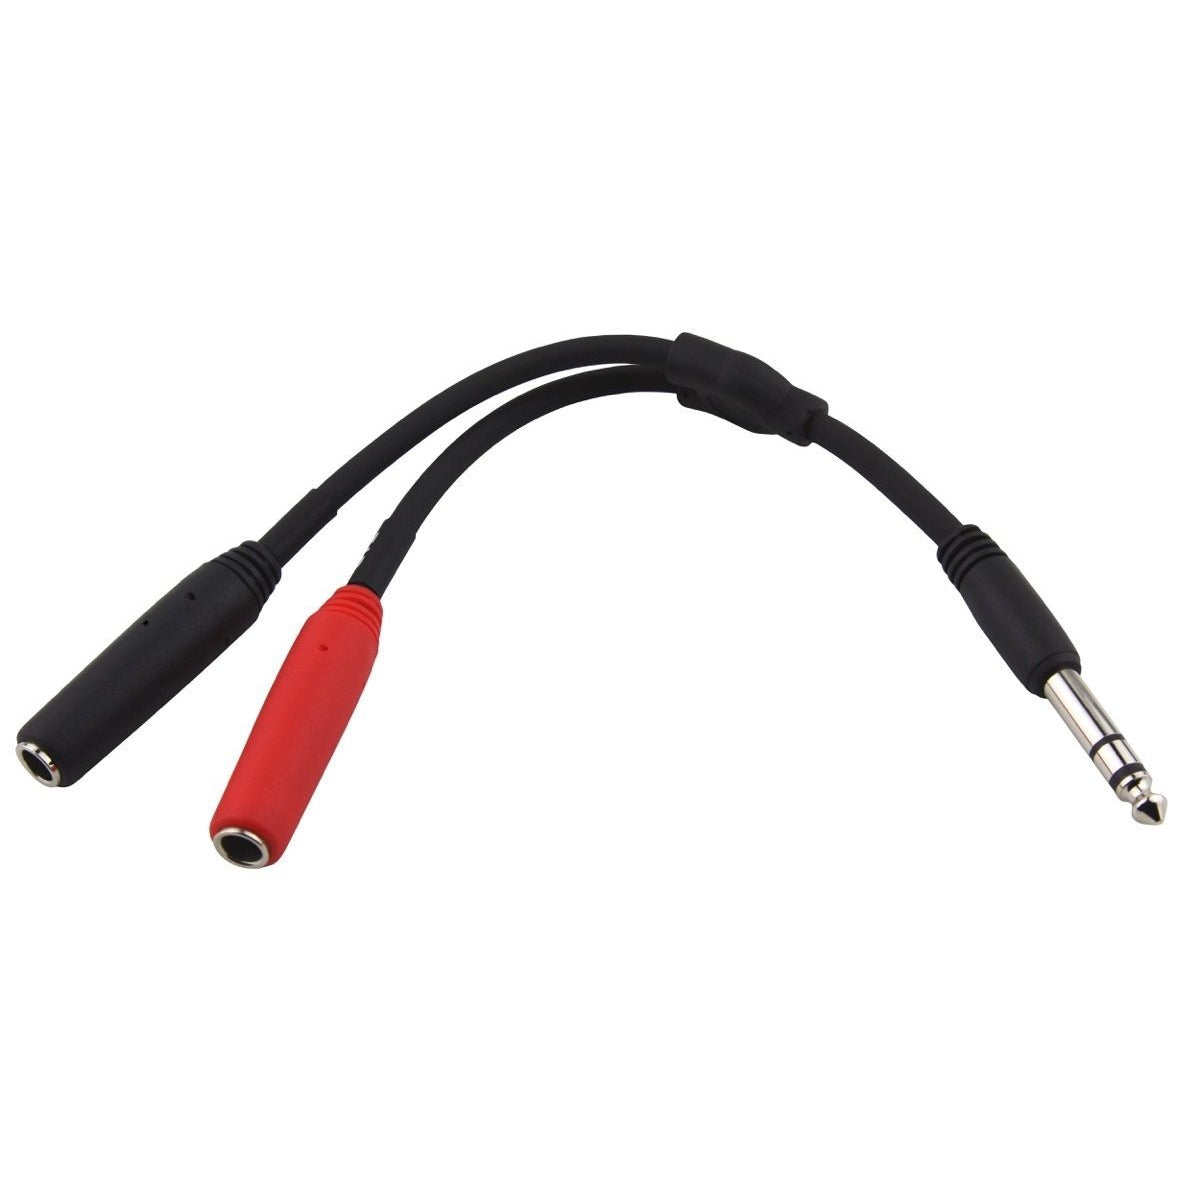 Pig Hog 1/4 Inch Stereo to Dual 1/4 Inch Mono Y-Cable, 6 Inch